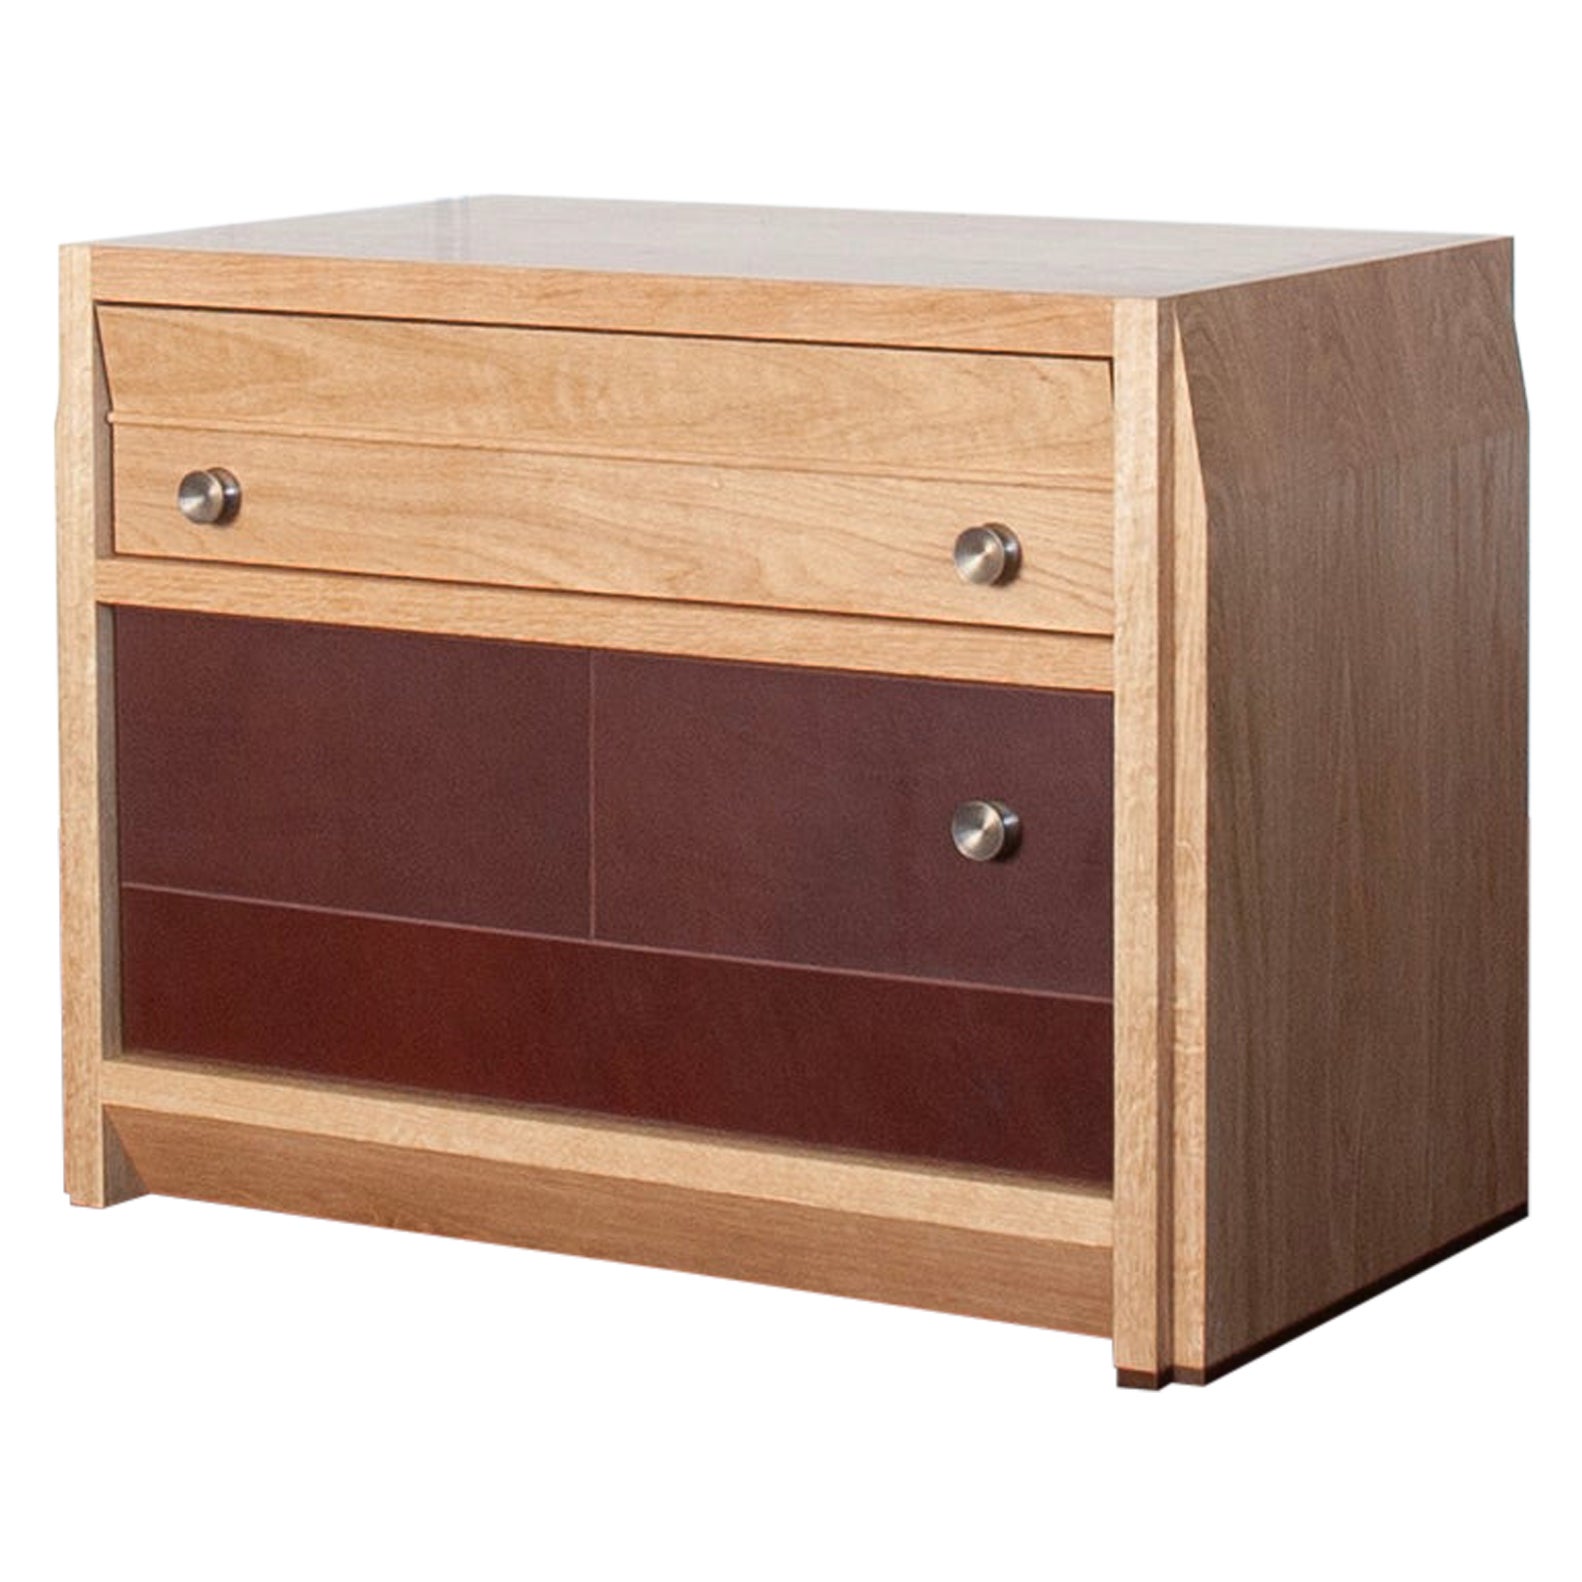 Octavia solid wood and leather nightstand and endtable by Crump and Kwash  For Sale